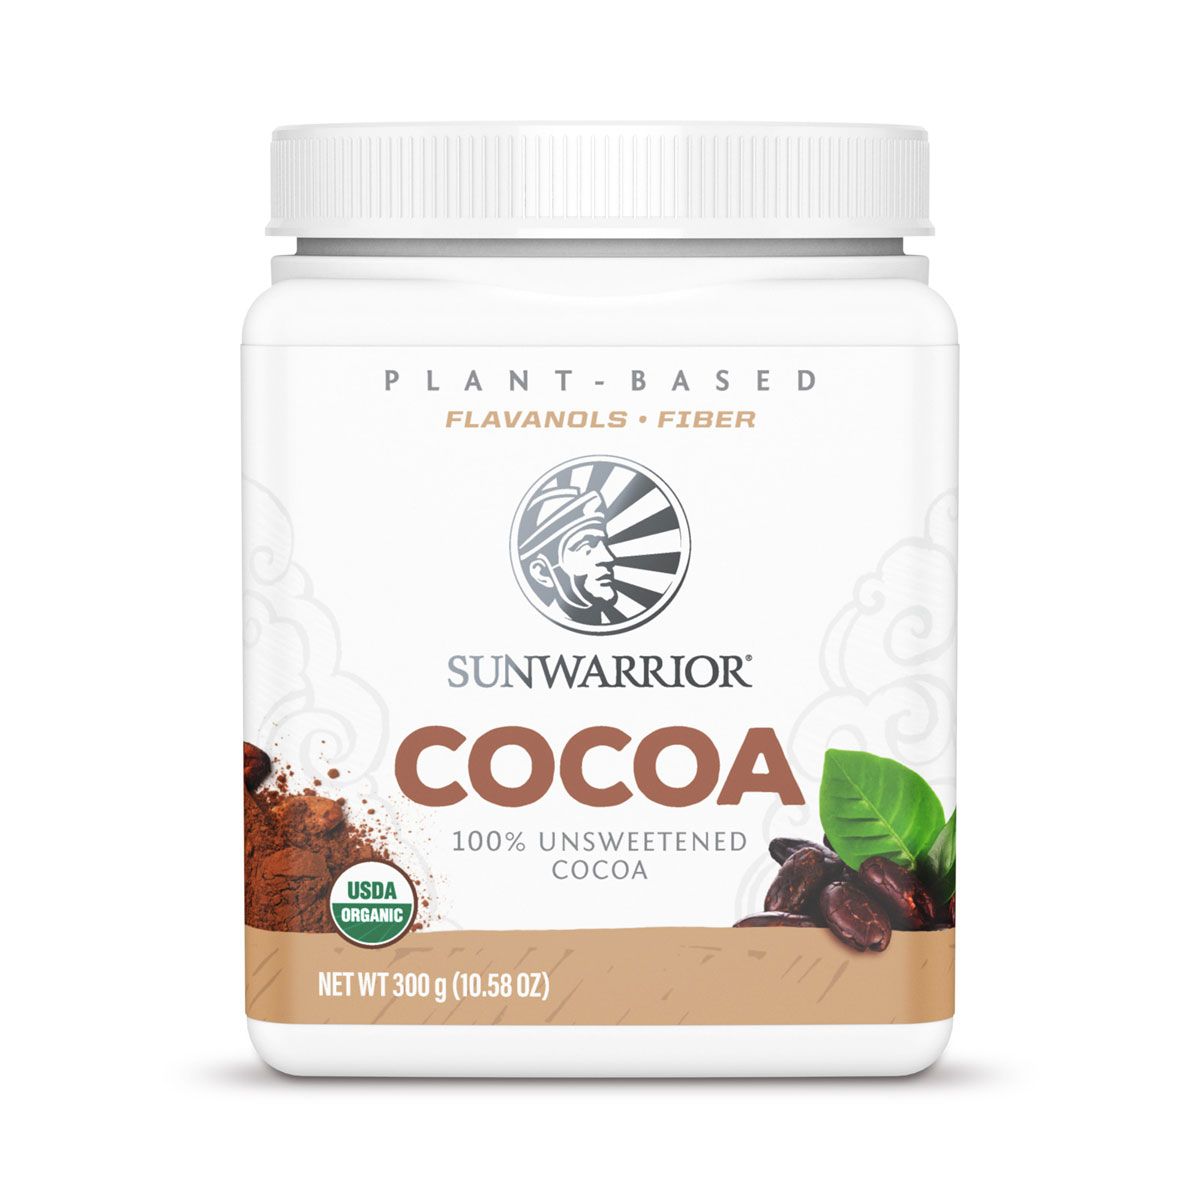 Super Topping Exotique BIO au Cacao Aguaymanto - 190g - Superaliments